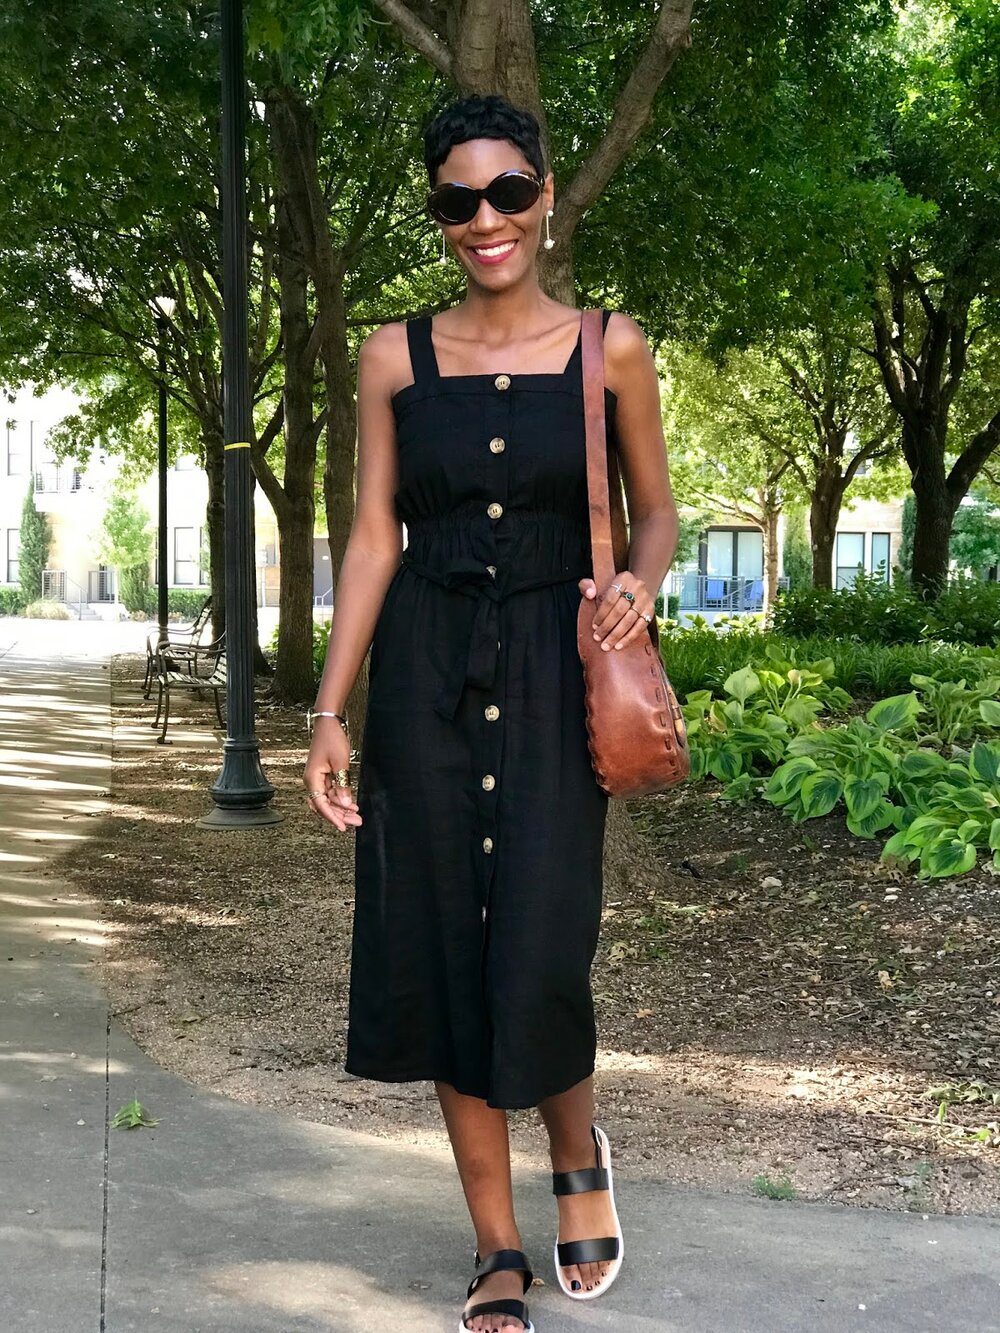 Quick OOTD: I Am SOOOOO Obsessed With This Little Black Dress + Other New Accessories!